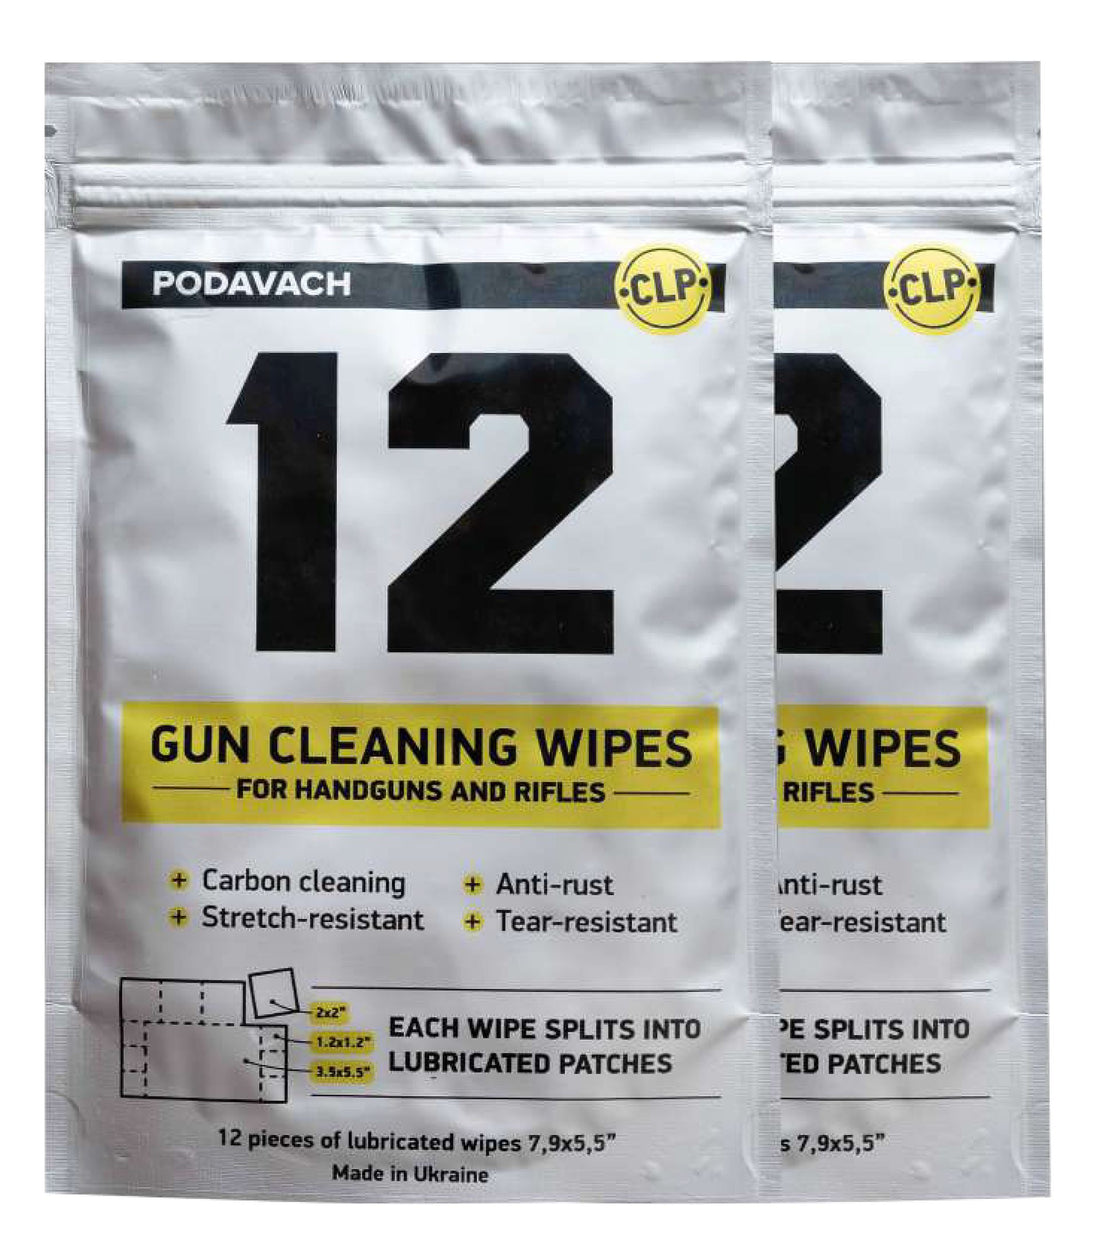 PODAVACH GUN CLEANING WIPES UPGRADE: CLEAN WORK FOR A CLEAN SHOT